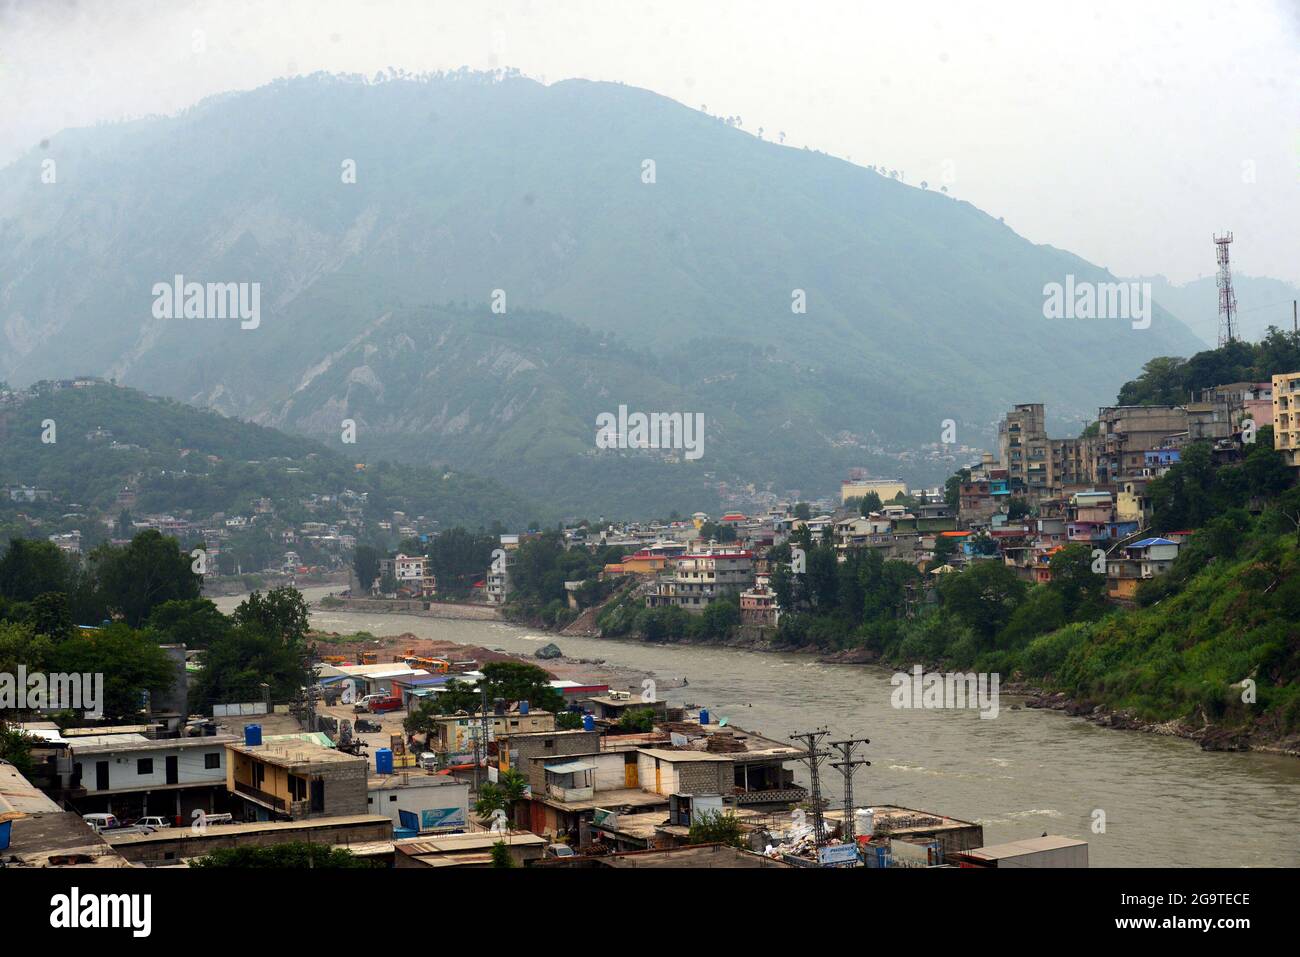 A beautiful view of mountains houses along the Neelam River have huge attraction for tourists from across the Country in Muzaffarabad, Azad Kashmir. Muzaffarabad is the capital and second largest city of Azad Jammu and Kashmir, Pakistan after Mirpur. It is located in Muzaffarabad District on the banks of the Jhelum and Neelum rivers. The Neelum River in the Kashmir region of India and Pakistan. The Neelam River enters Pakistan from India in the Gurais sector of the Line of Control, and then runs west till it meets the Jhelum River north of Muzzafarabad.The Kishenganga was named Neelum either d Stock Photo